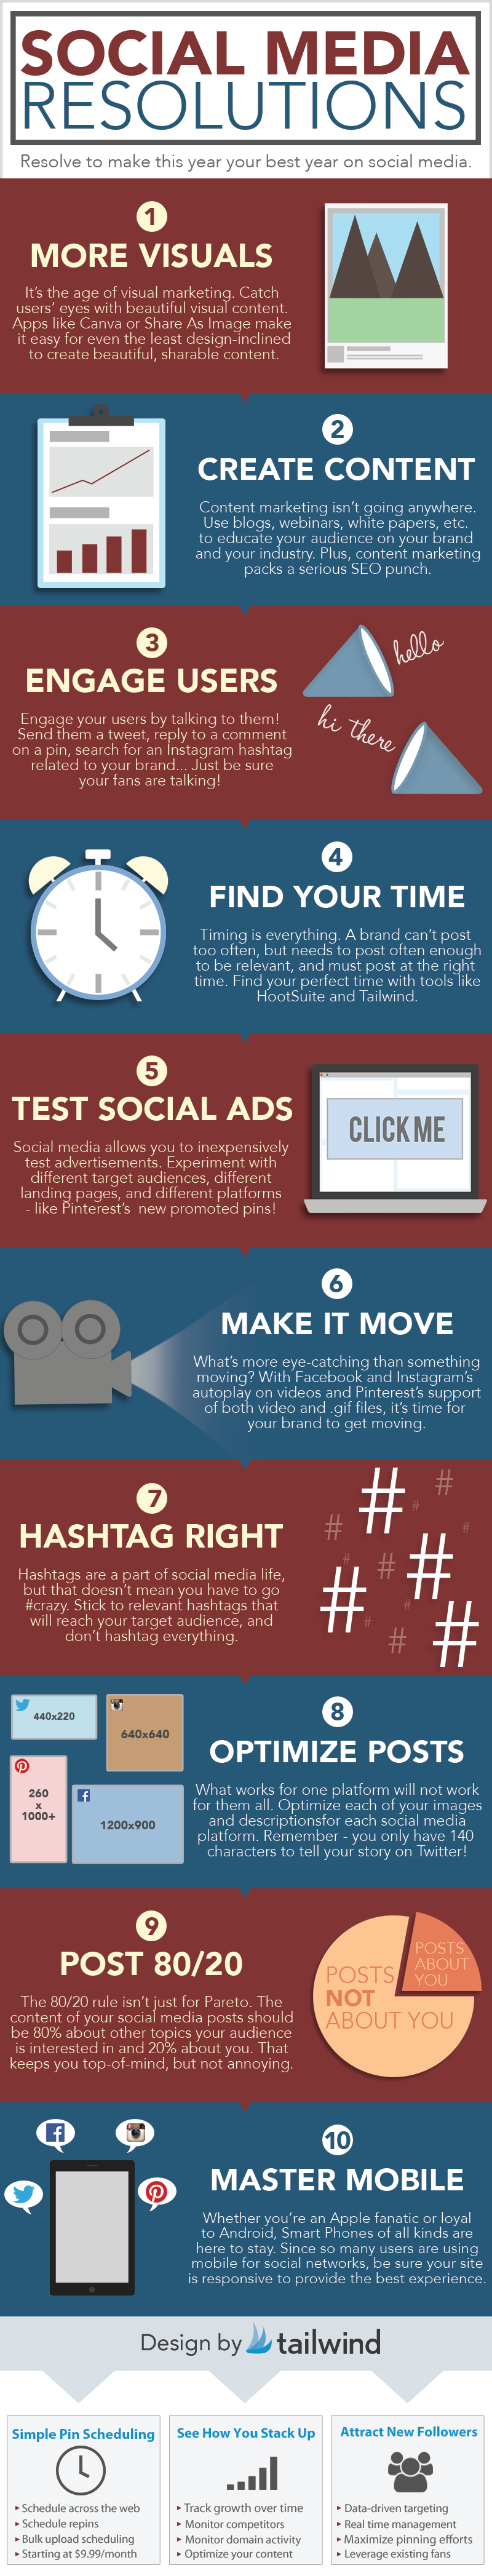 10 Interesting Facts About Social Media Resolutions